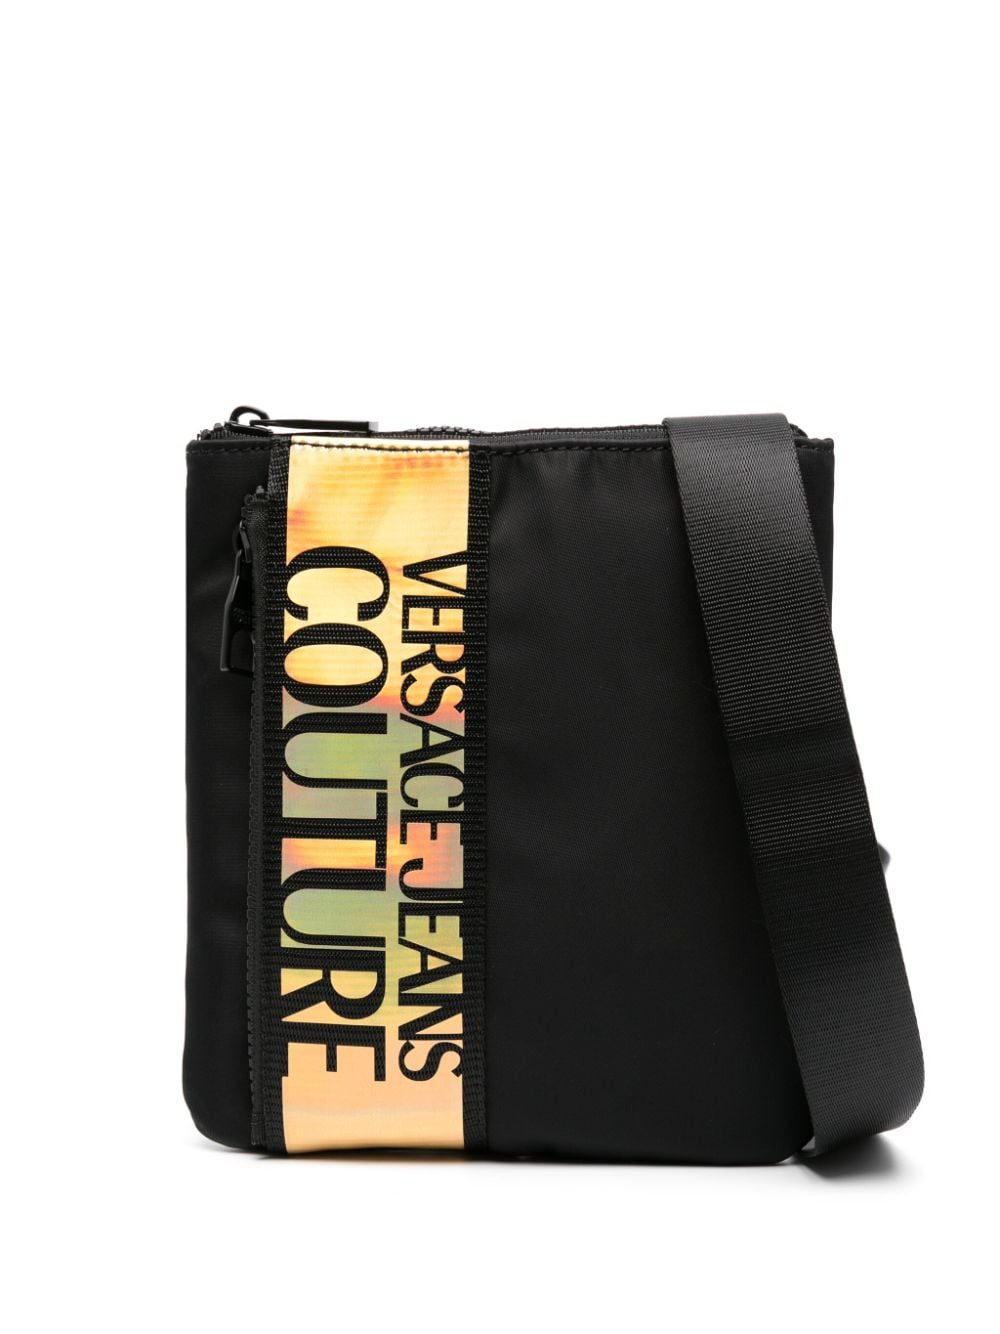 Versace Jeans Couture iridescent logo-tape messenger bag - Black von Versace Jeans Couture